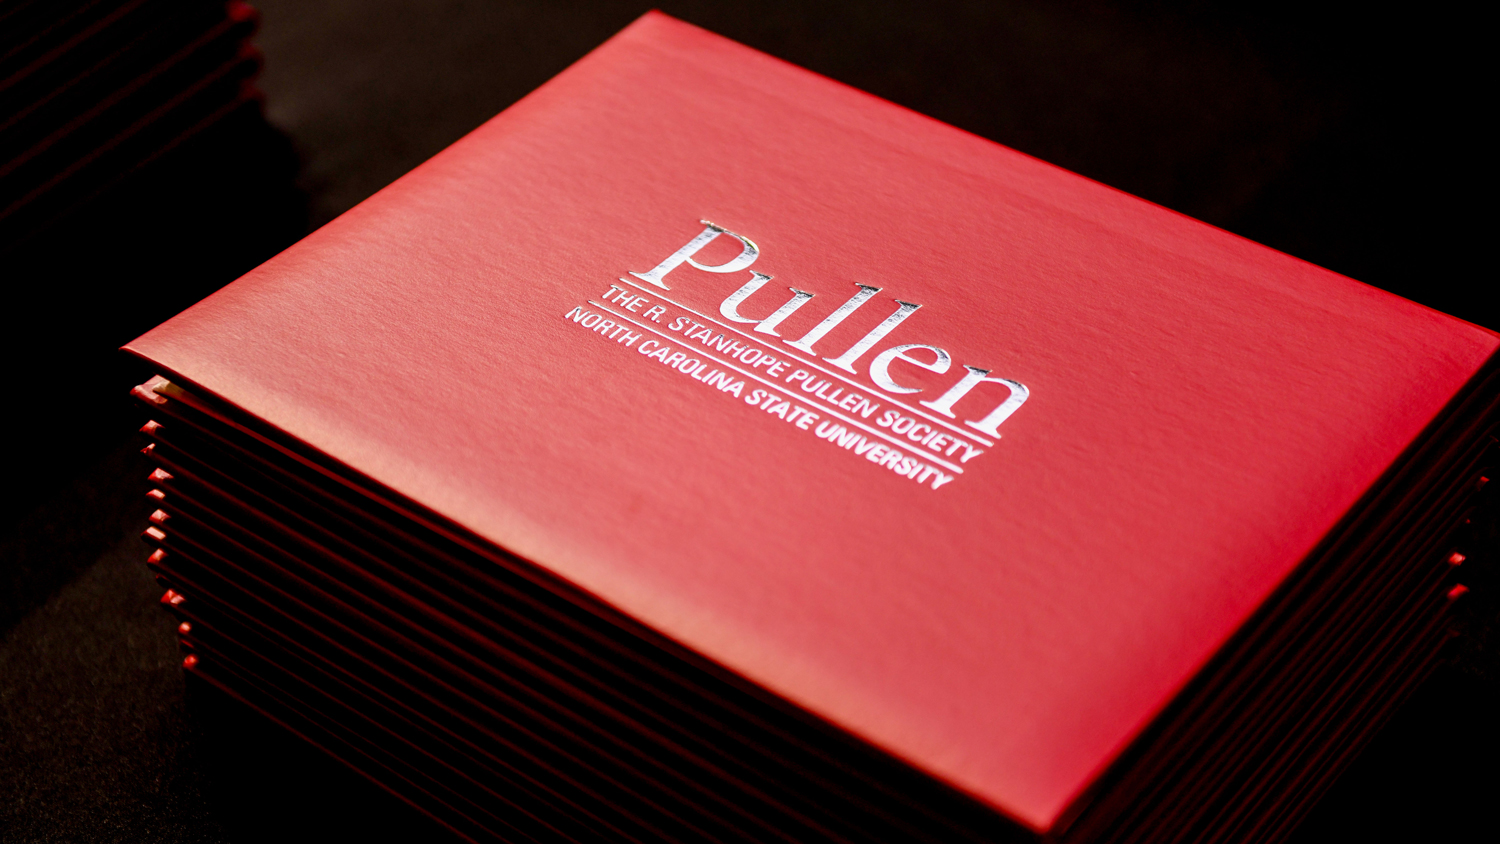 Special Pullen Society certificates were presented to each new member during the 2023 induction event.